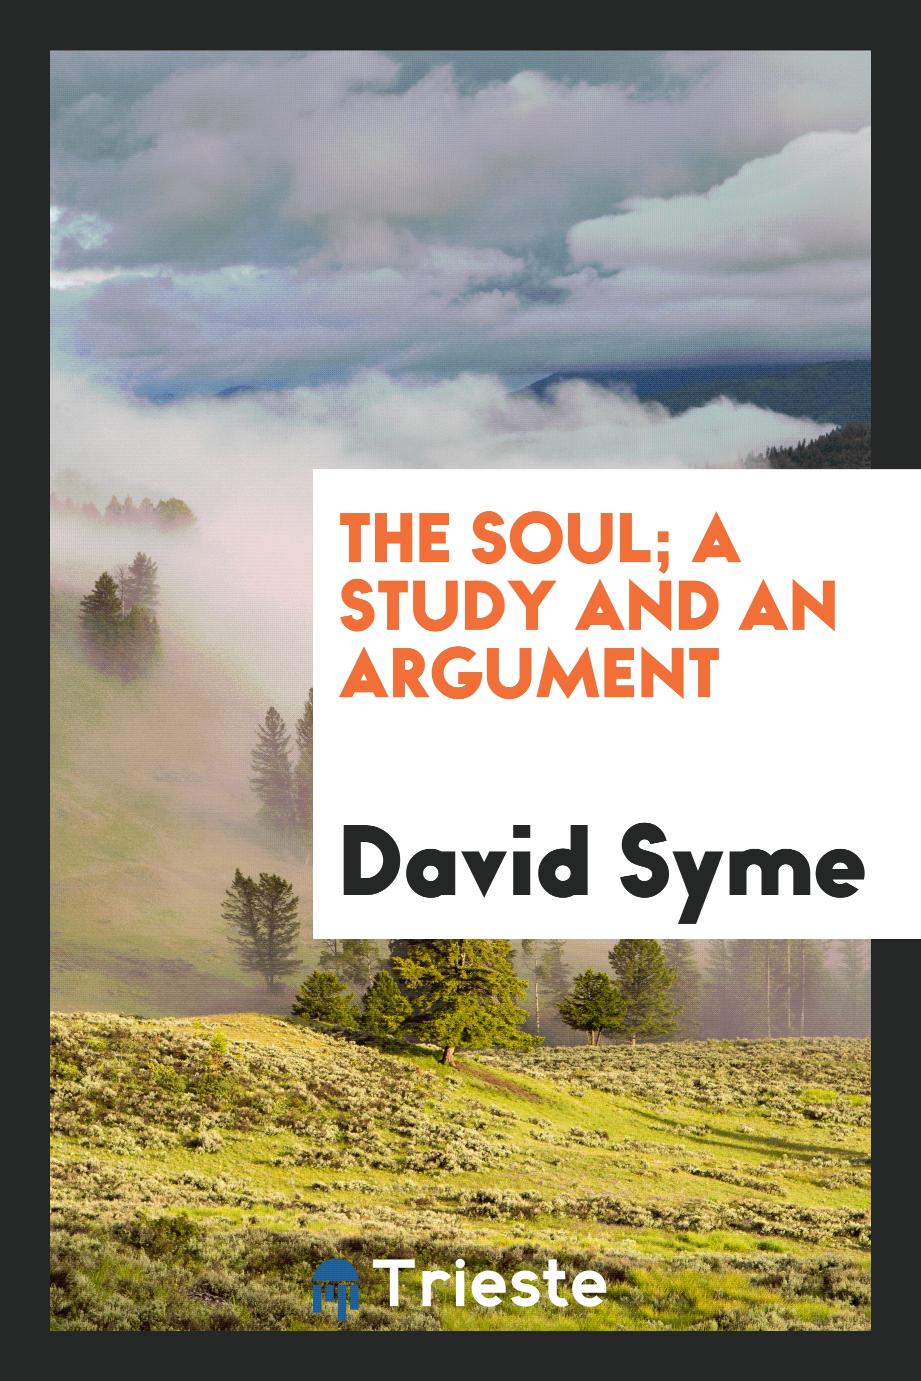 The soul; a study and an argument